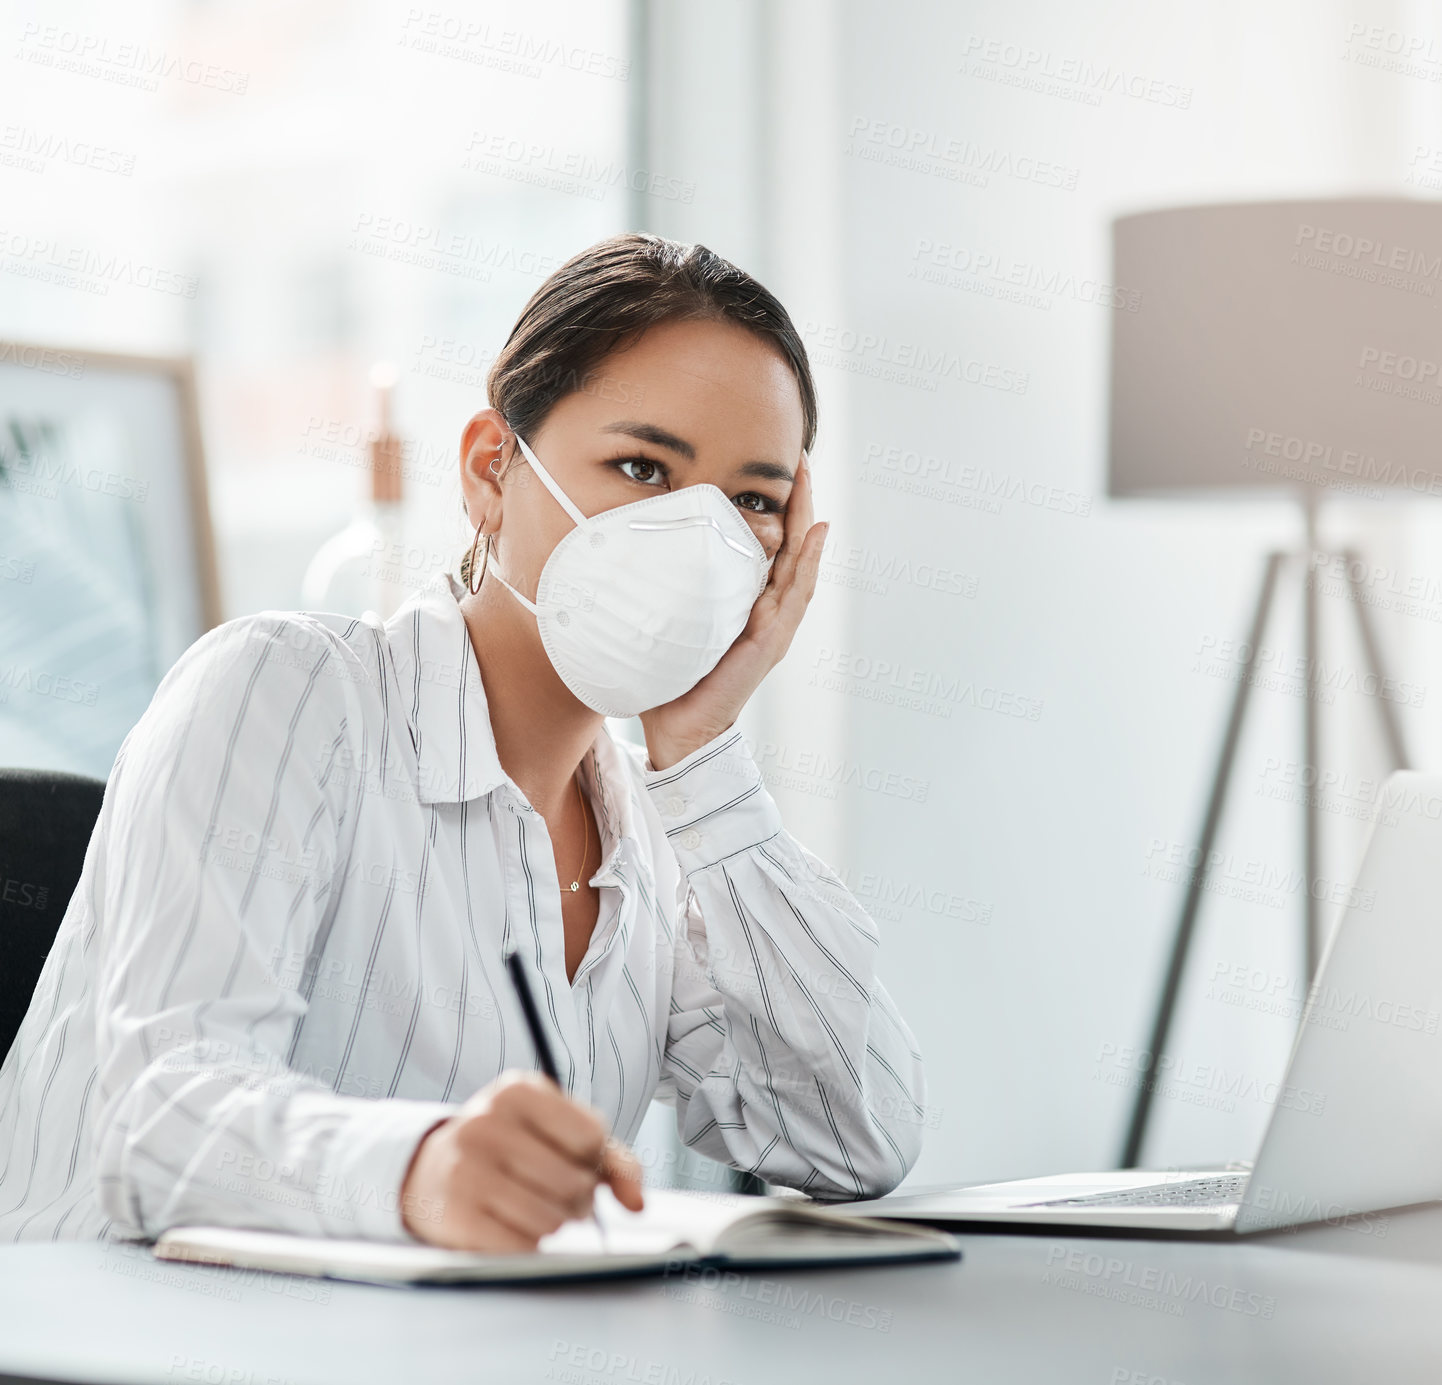 Buy stock photo Shot of a masked young businesswoman looking unhappy while working at her desk in a modern office